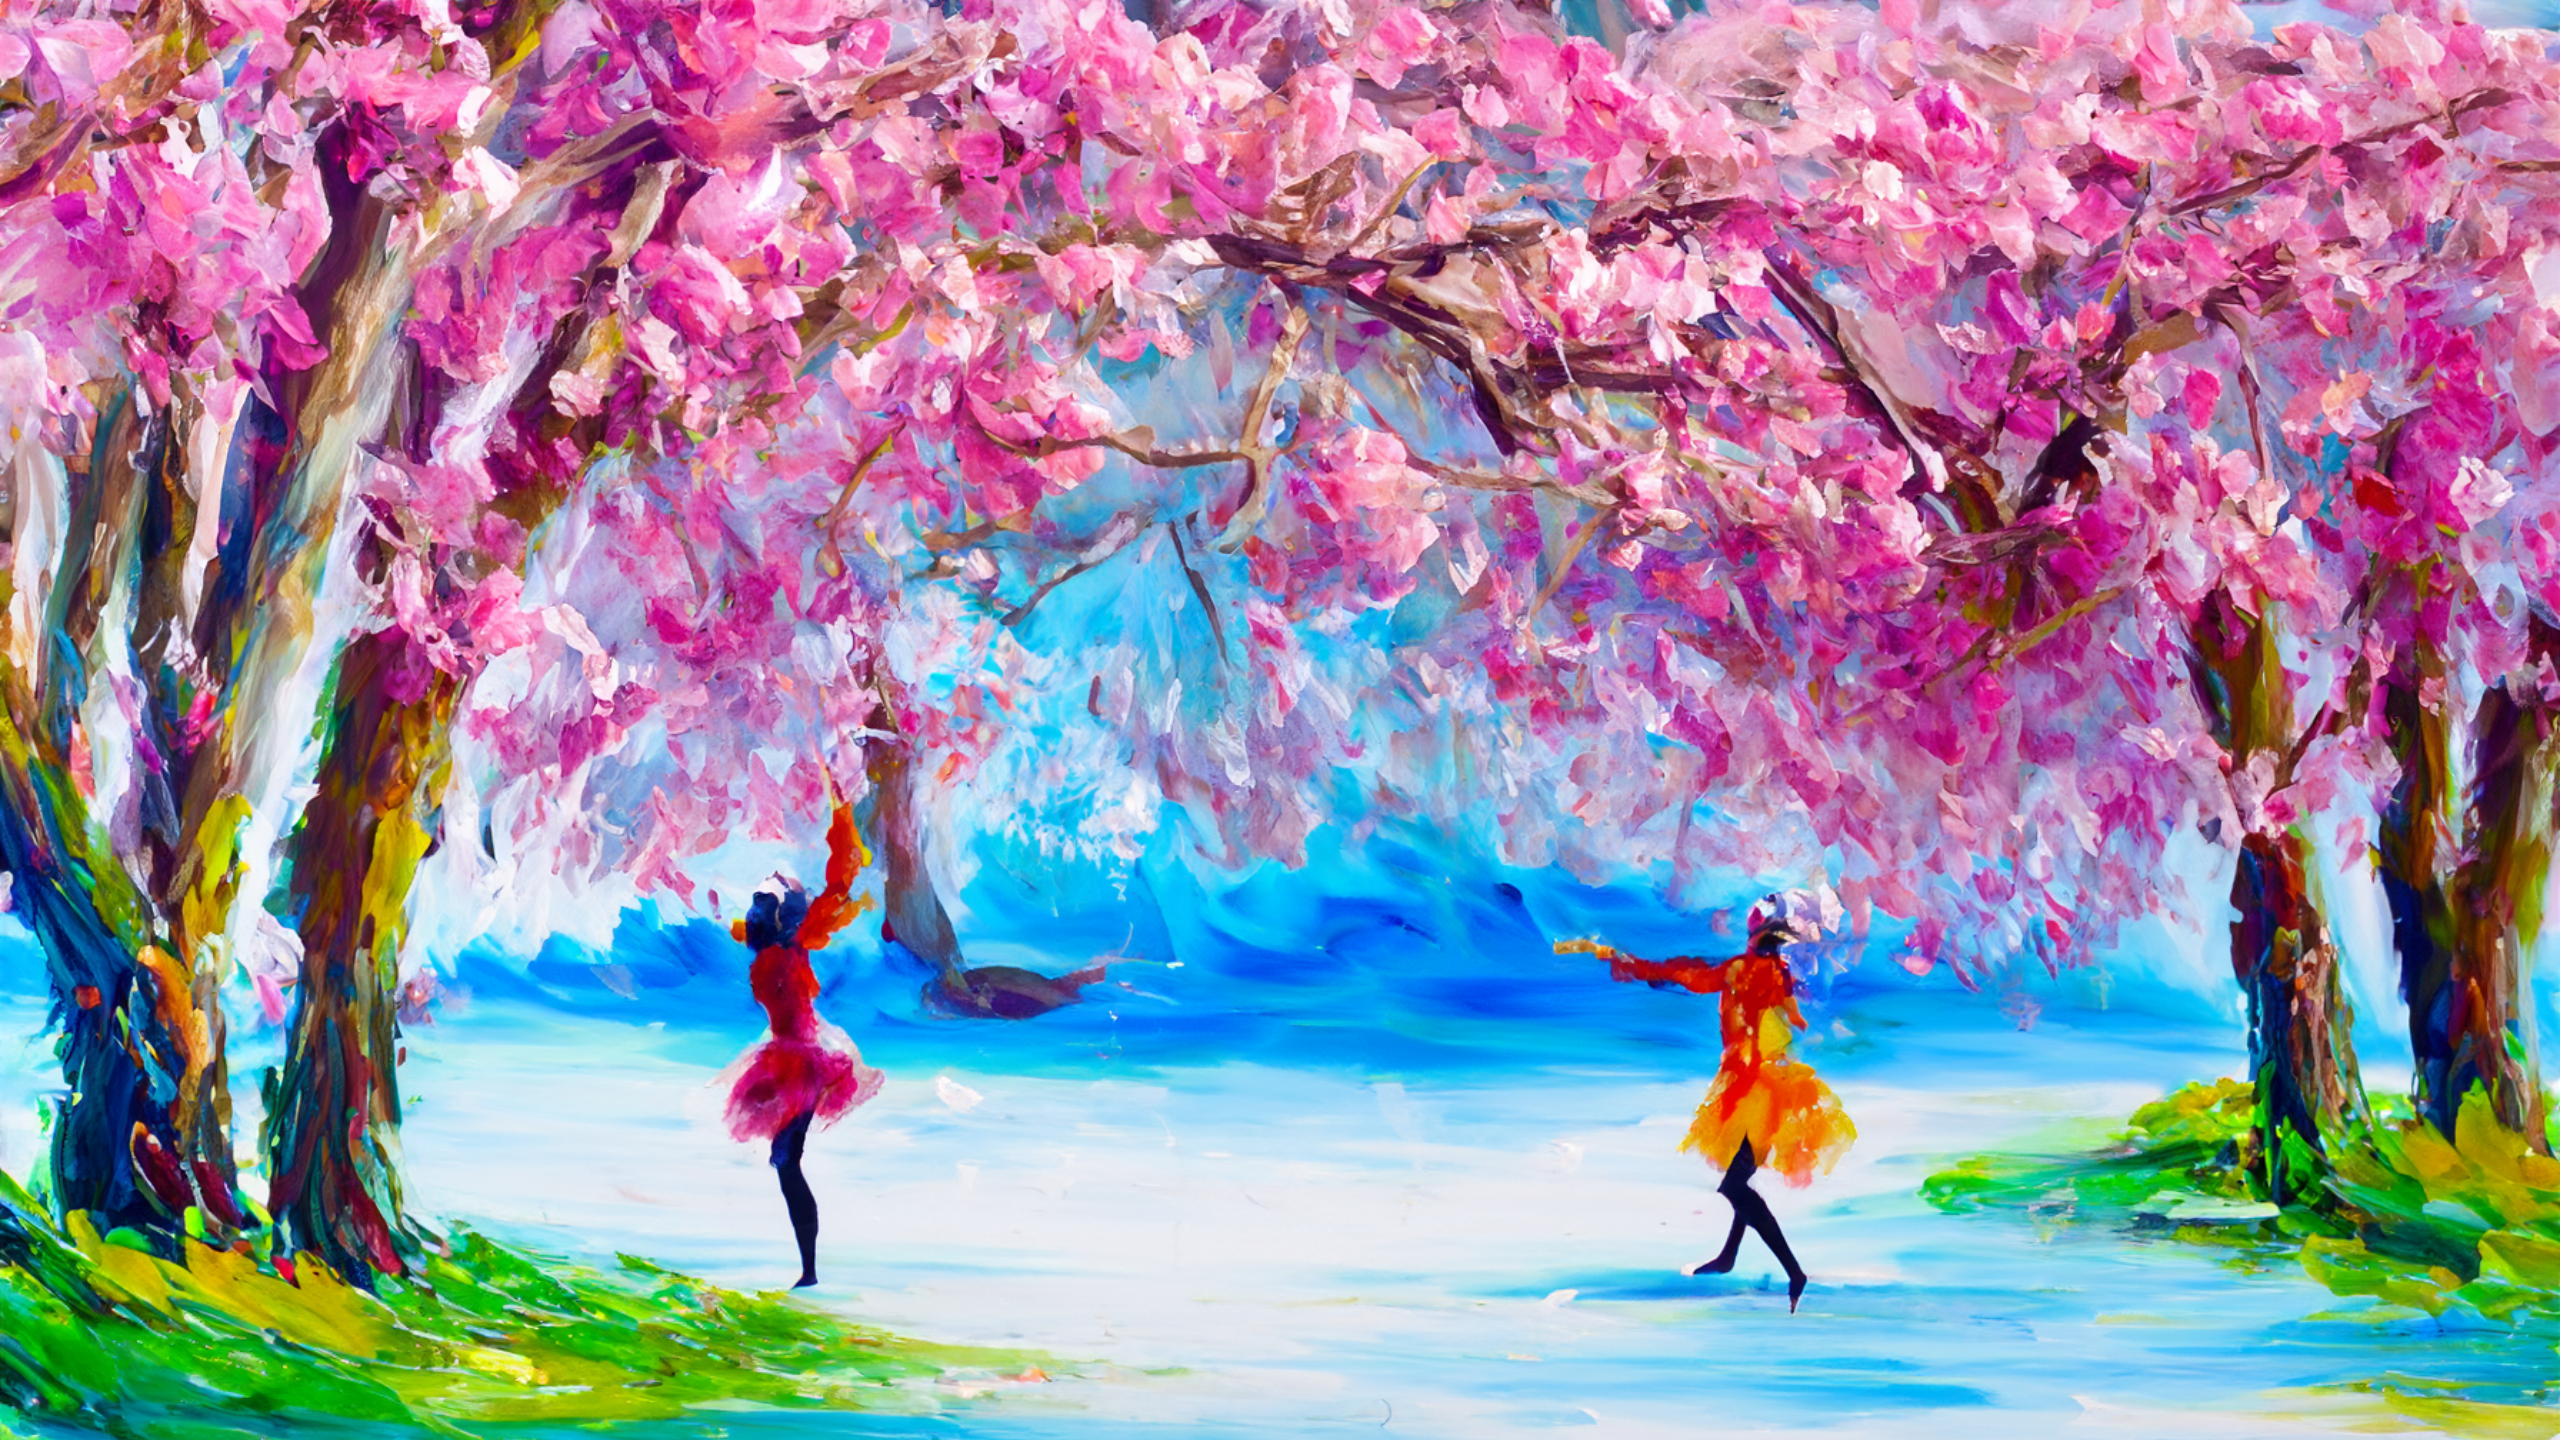 General 2560x1440 oil painting landscape blossoms cherry blossom dancing trees flowers artwork